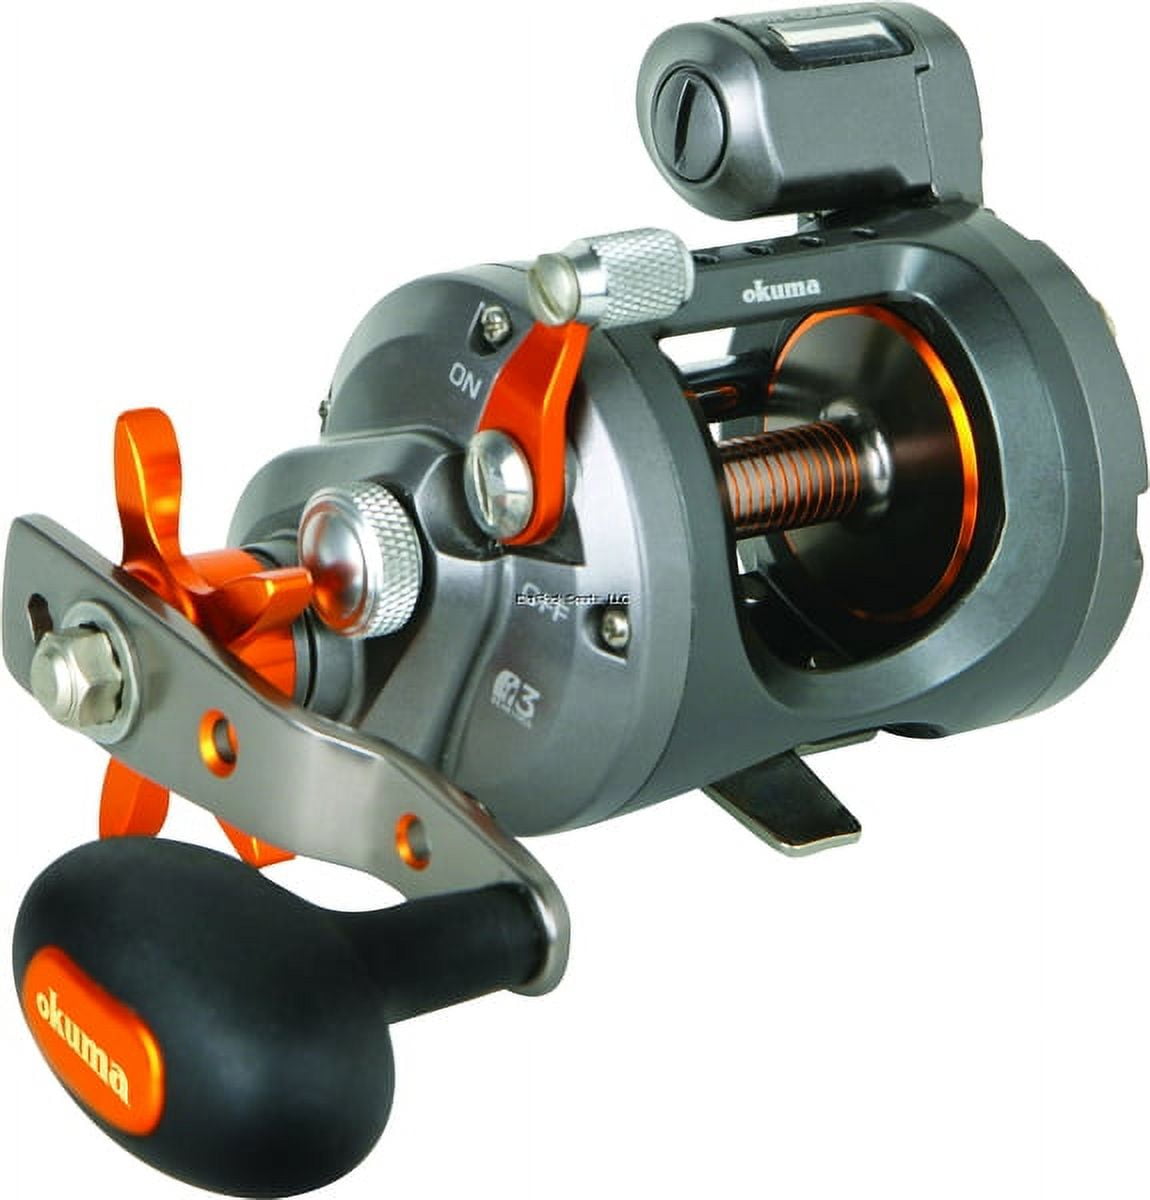 OKUMA COLD WATER CW-354DLX LOW PROFILE LINE COUNTER REEL LEFT-HAND FISHNG -  NEW